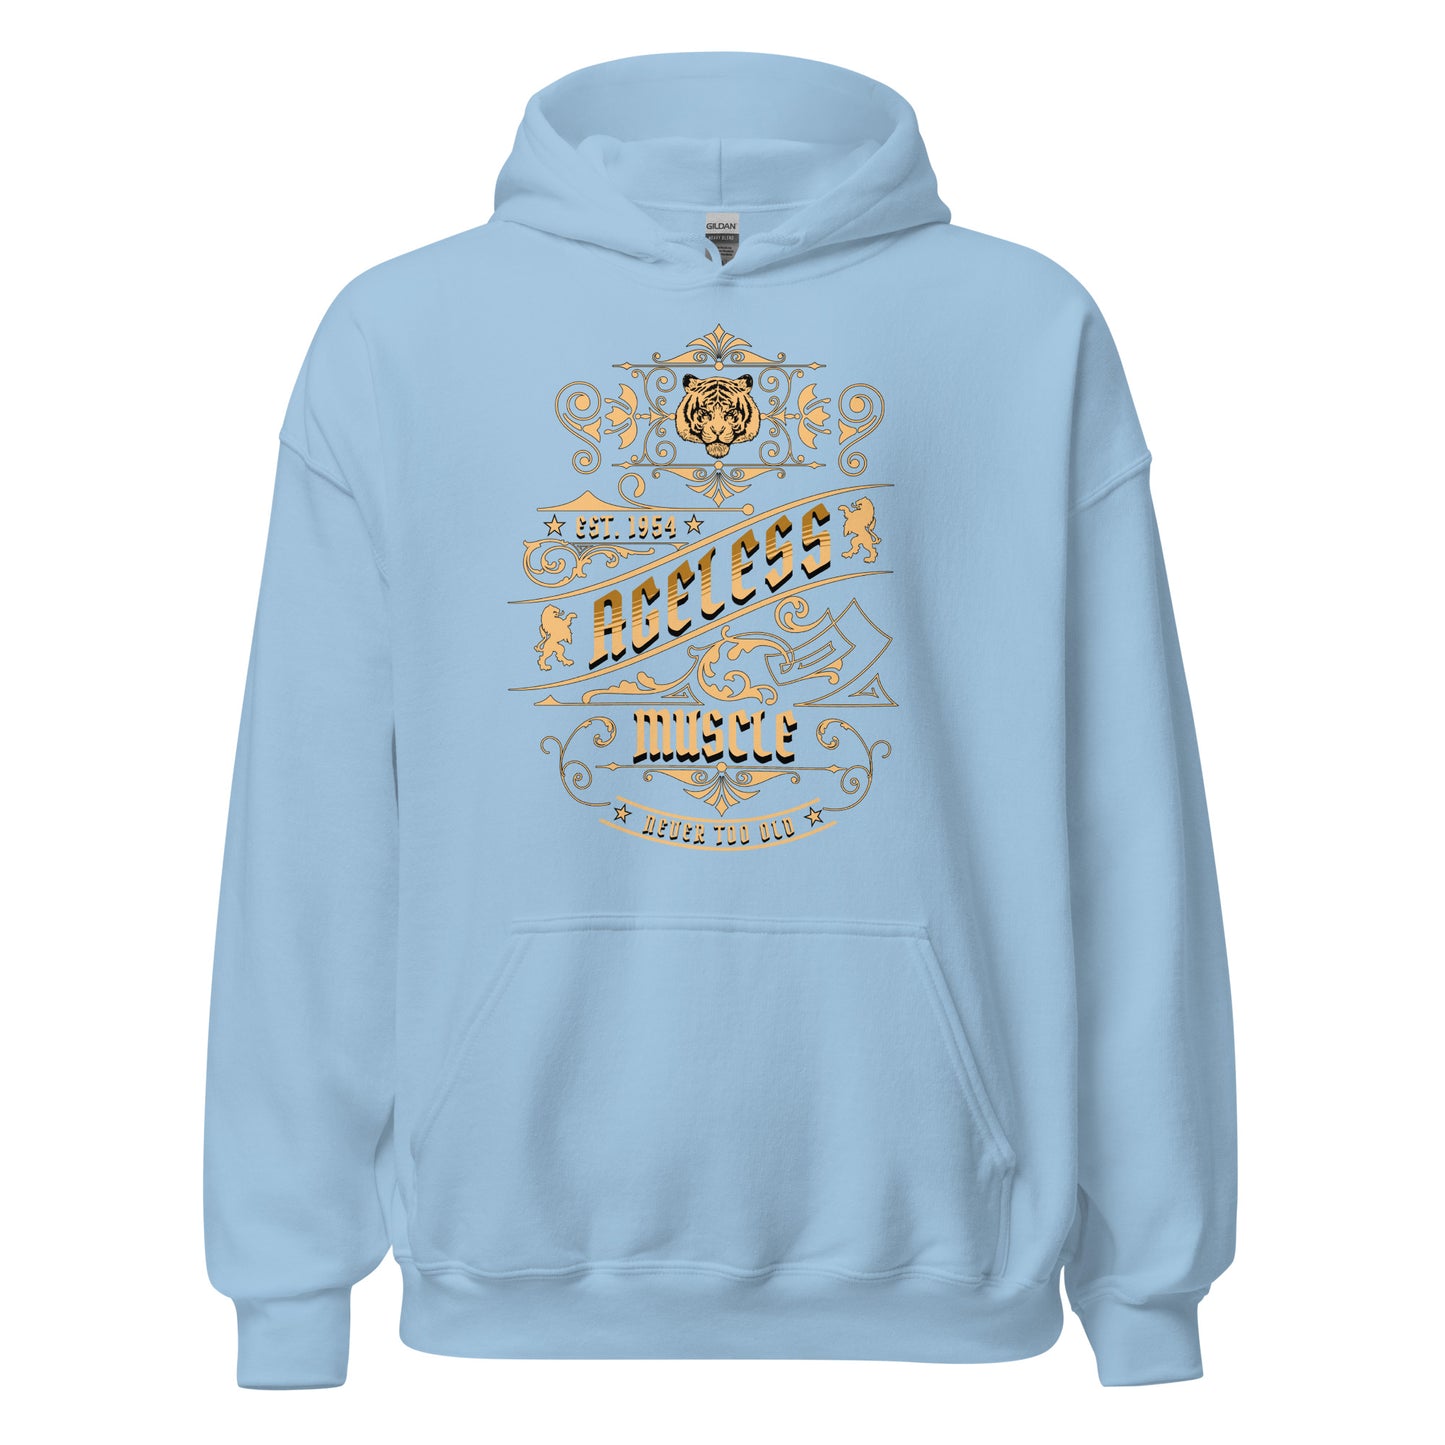 Ageless Muscle: Never Too Old Unisex Hoodie